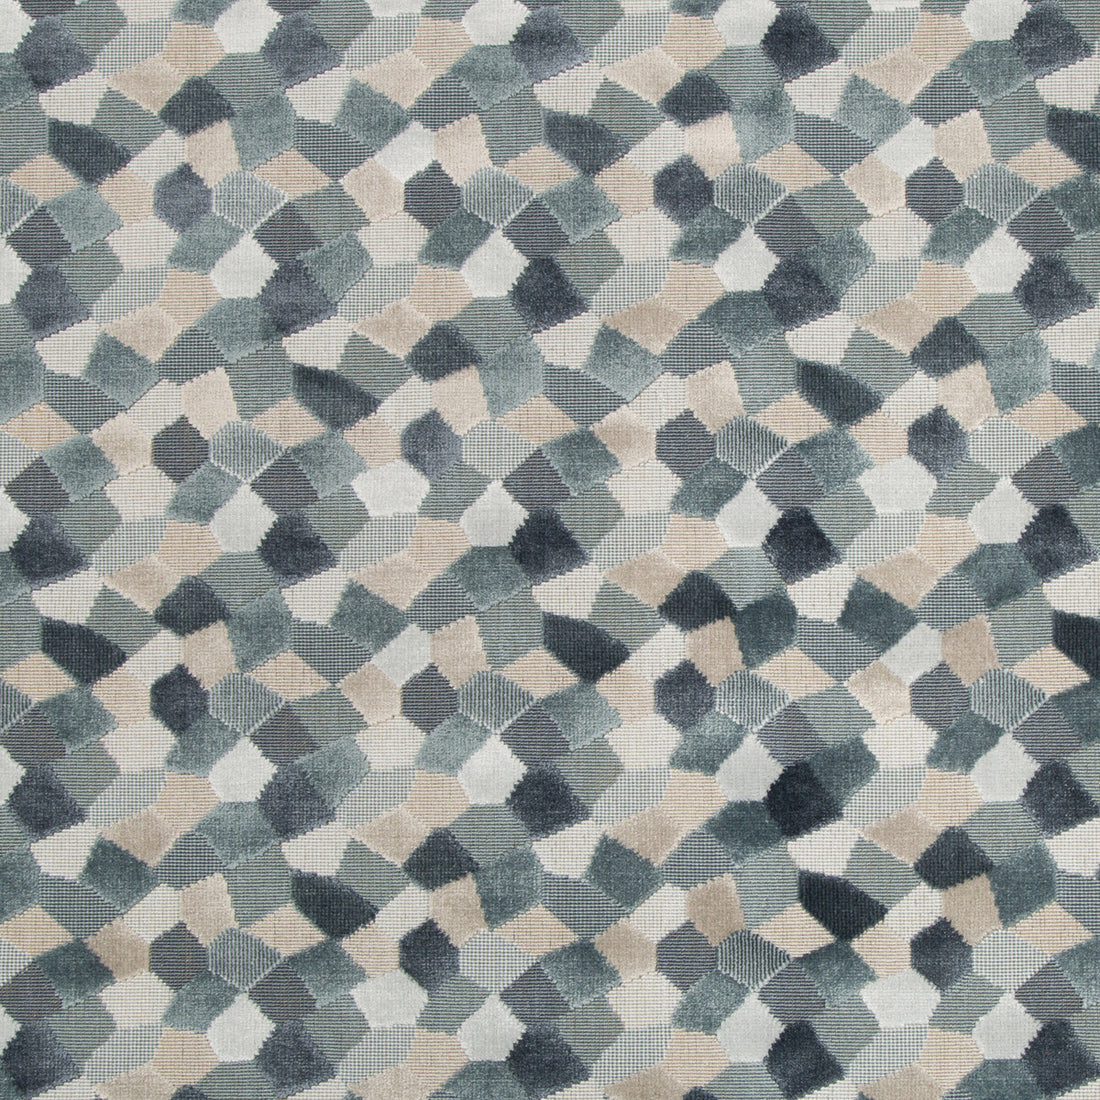 Modern Mosaic fabric in harbor color - pattern 34783.21.0 - by Kravet Couture in the Artisan Velvets collection